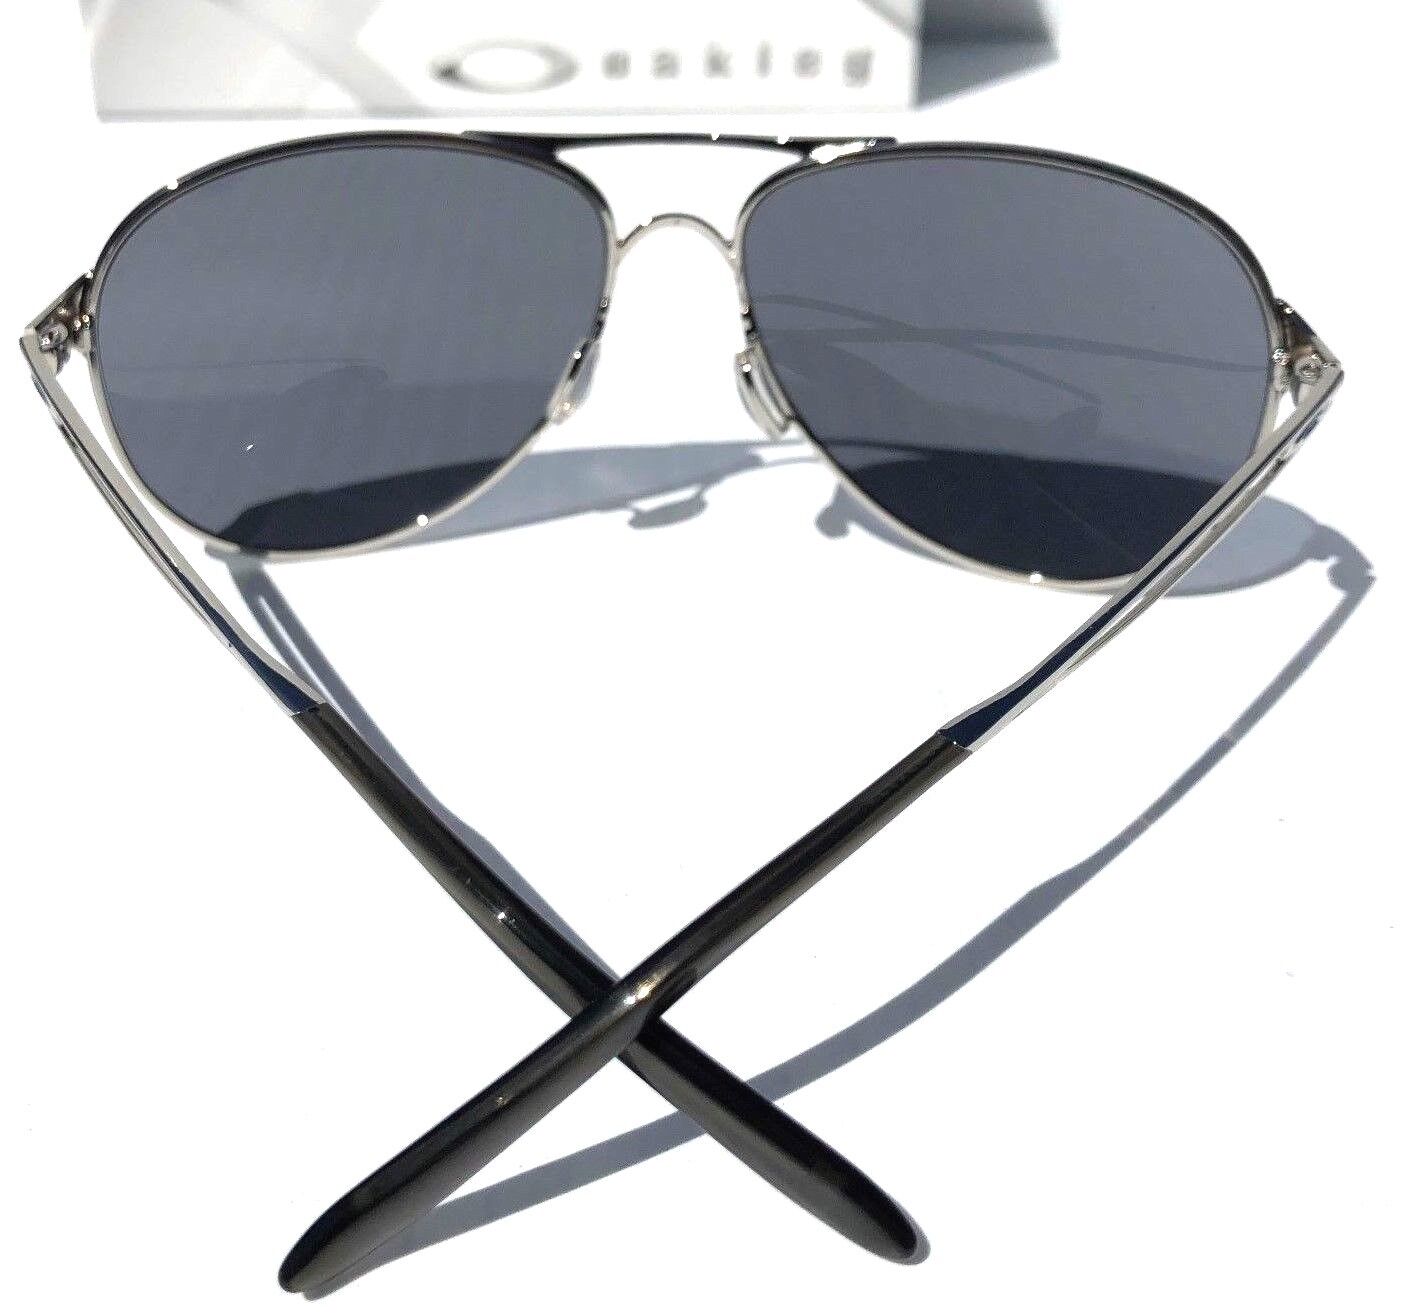 Oakley CAVEAT in Silver Frame with POLARIZED Galaxy Rose Gold lens Sunglasses oo4054 - Two-Lens Bundle!